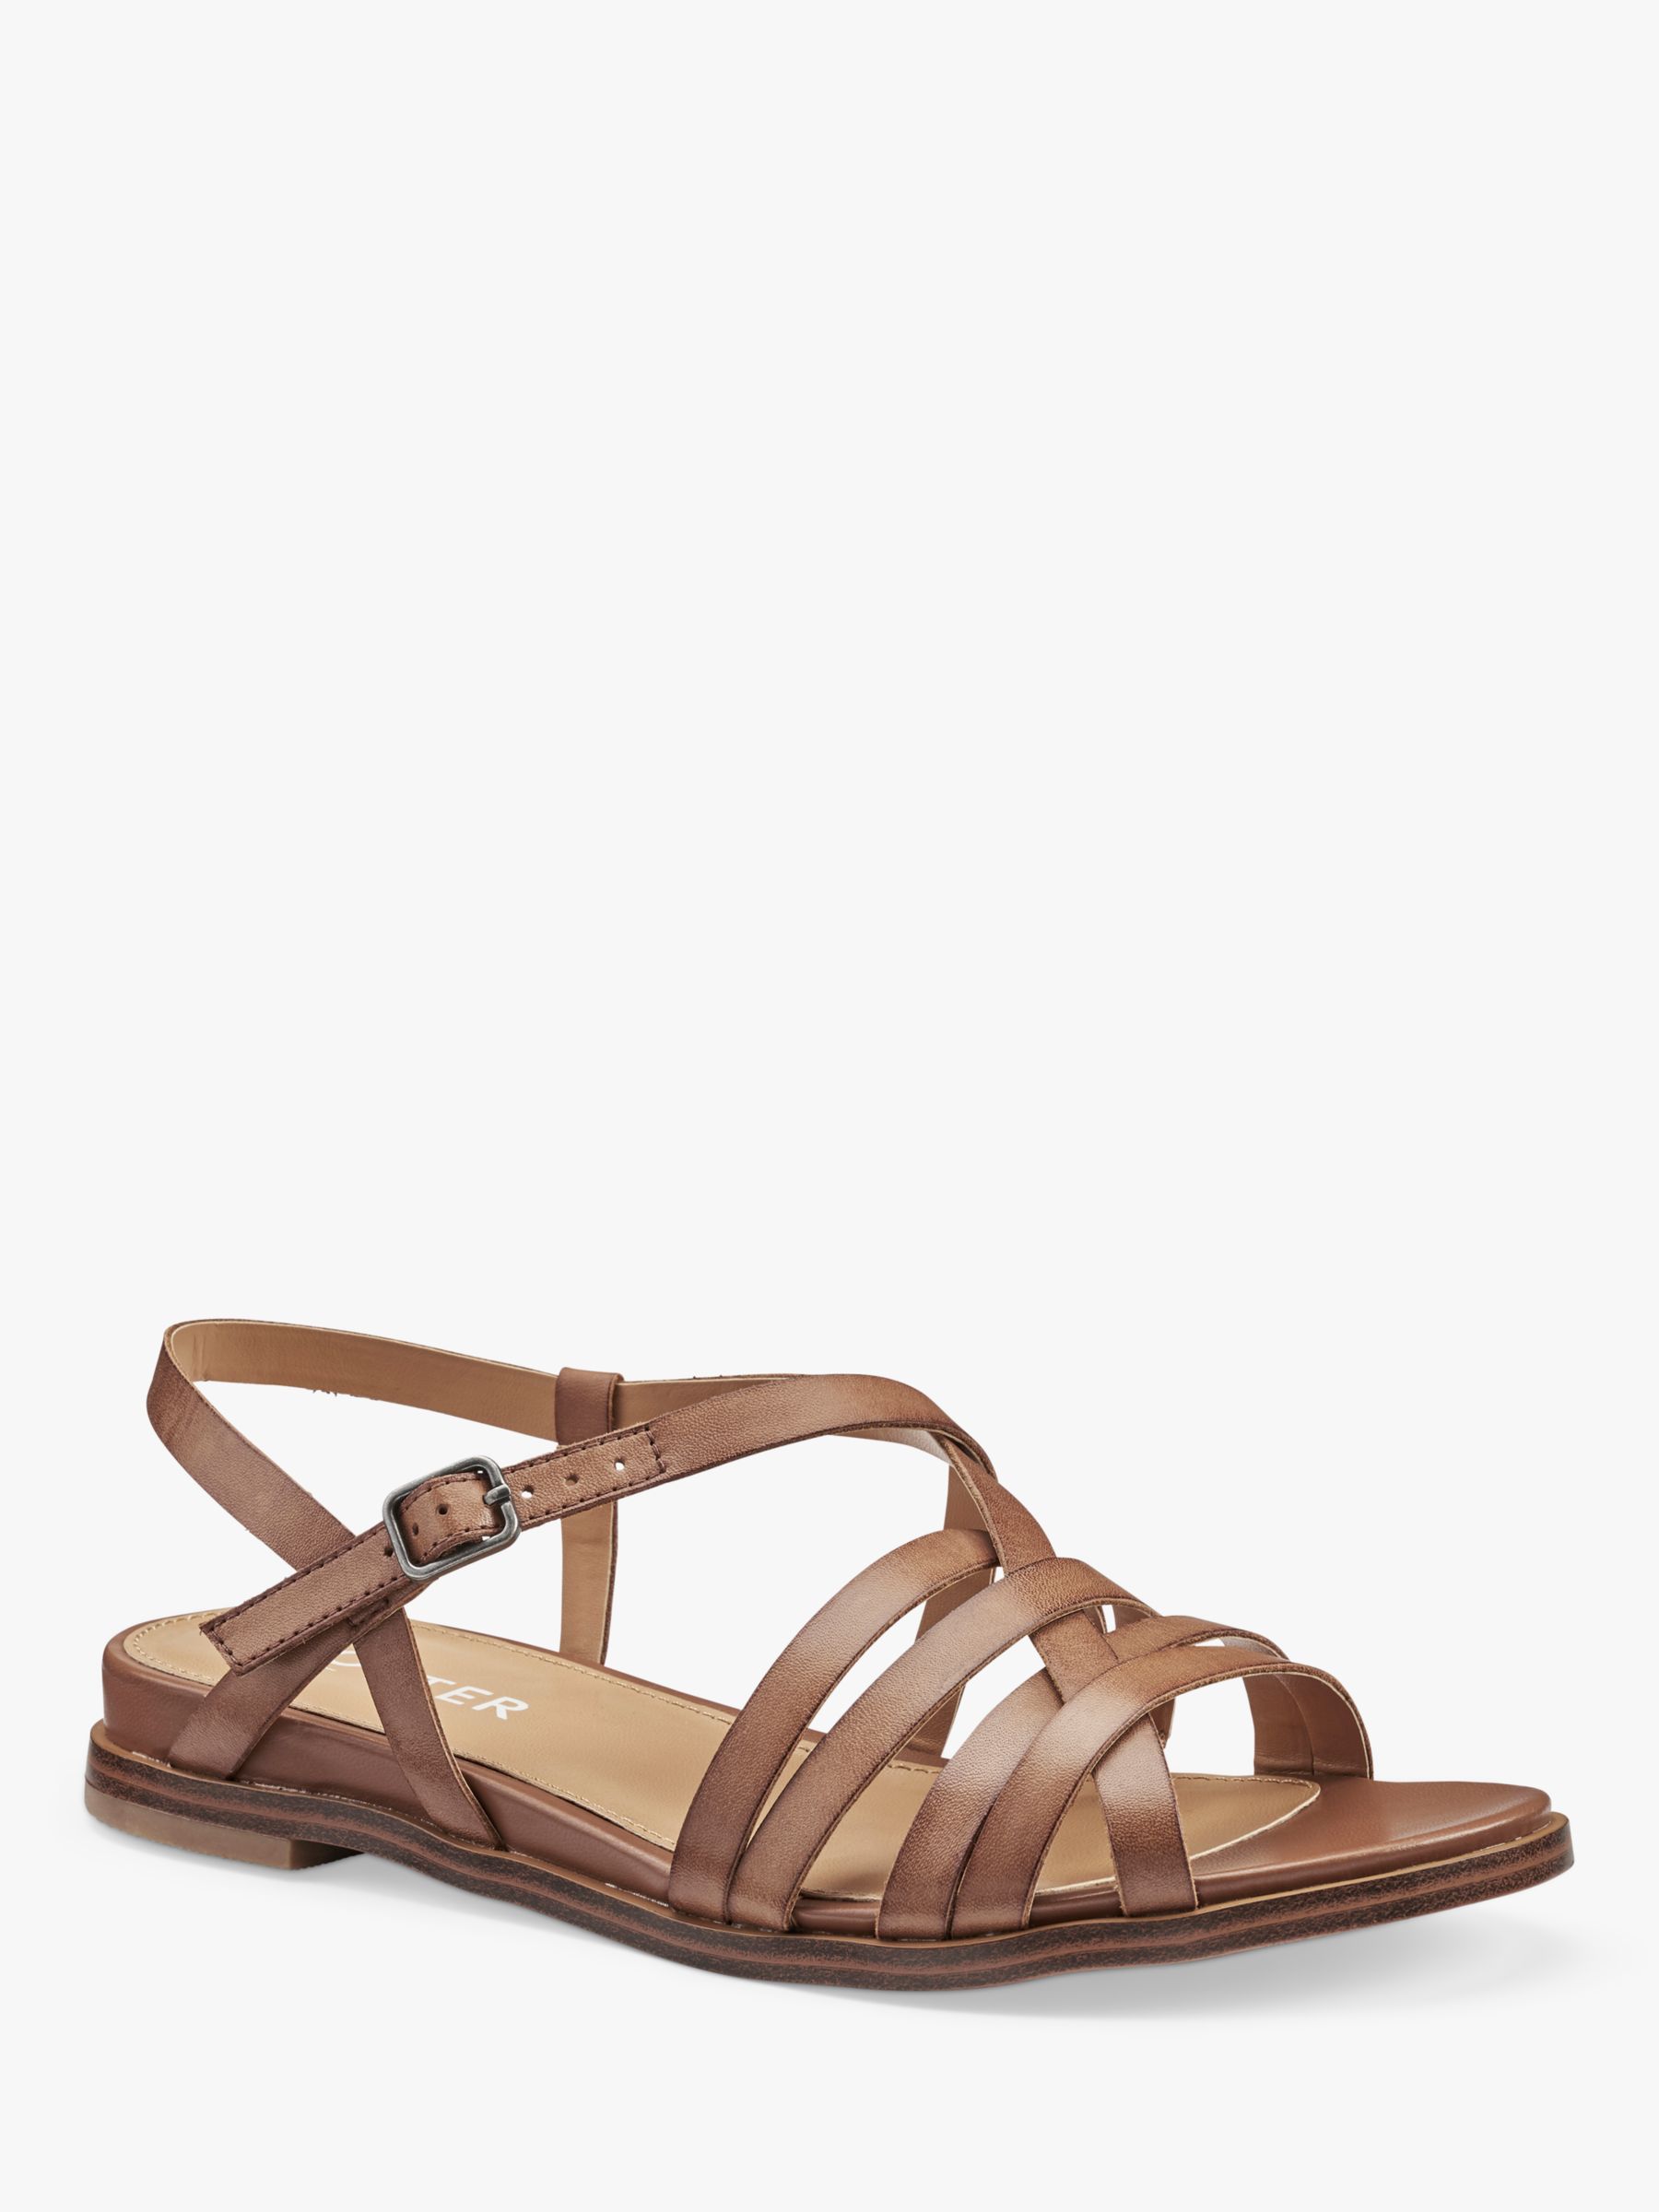 Buy Hotter Sienna Wide Fit Strappy Sandals, Rich Tan Online at johnlewis.com